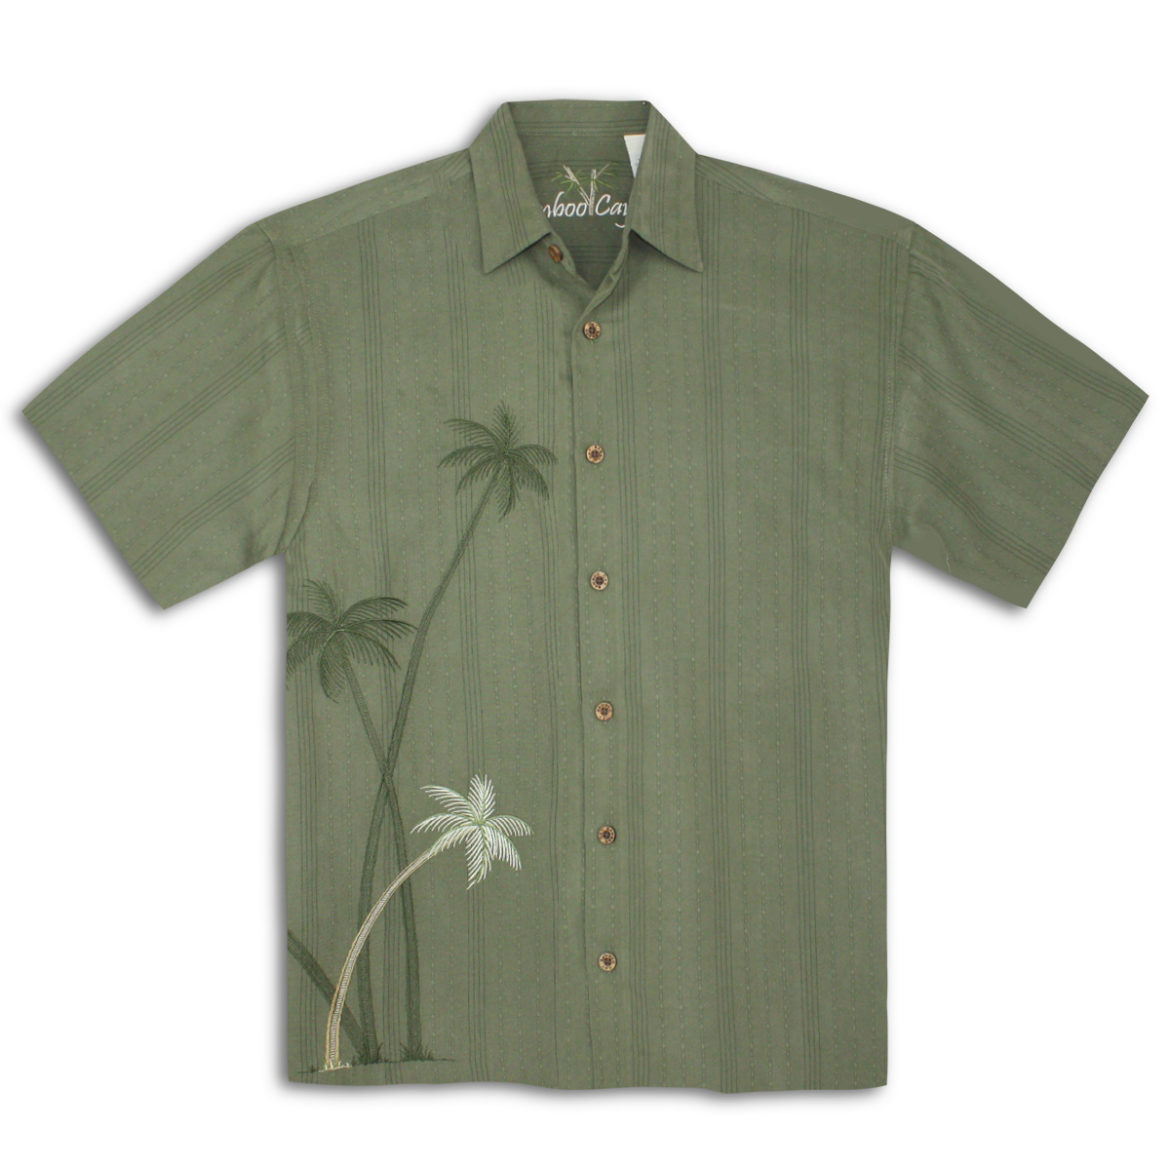 Bamboo Cay - Men's Shirt- Flying Palms - Olive-Front